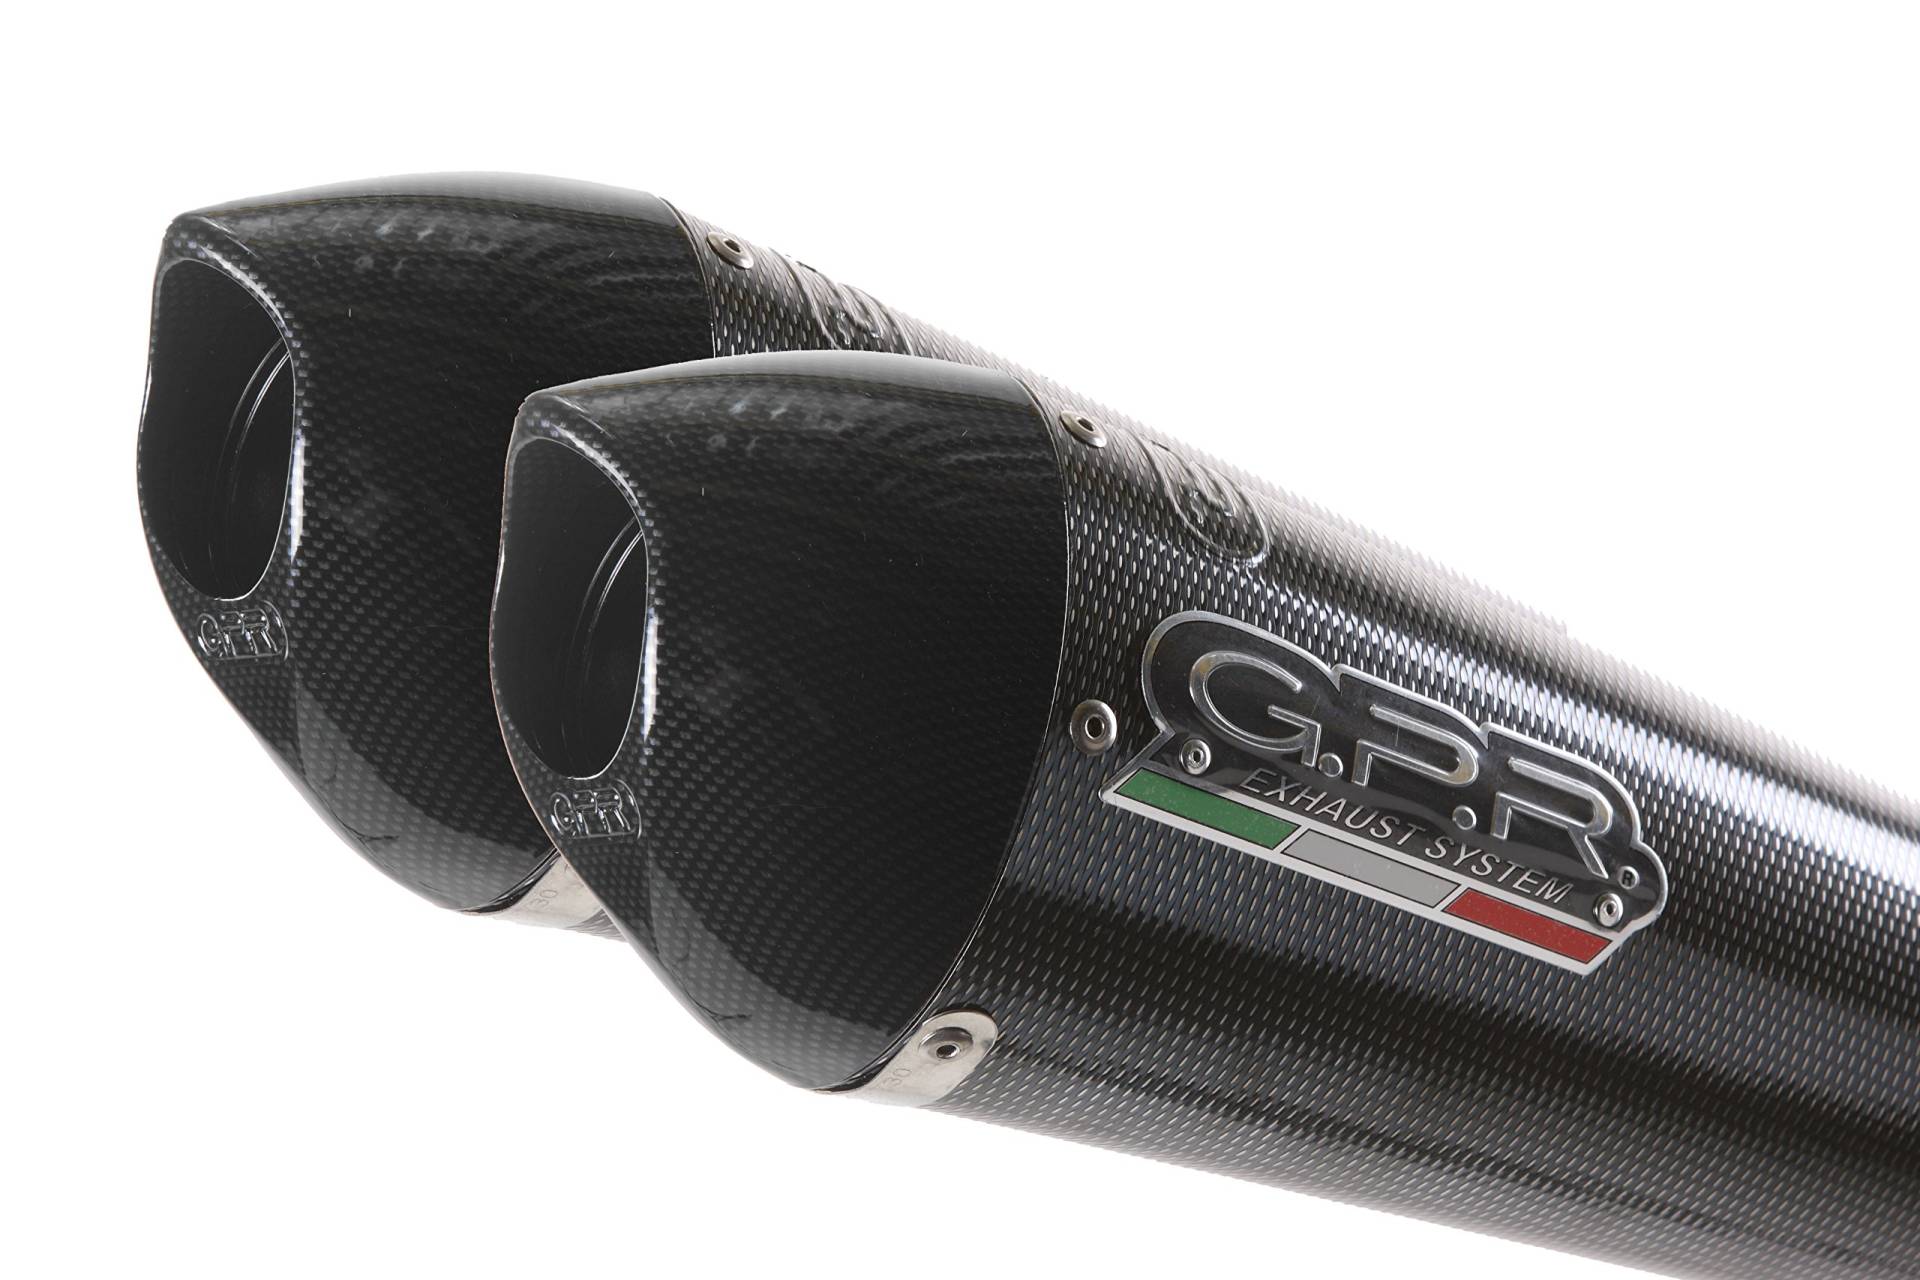 GPR Auspuff Endkappe – Ducati Monster 750 1996/00 Dual HOMOLOGATED Slip Exhaust System High Level by GPR Exhaust Systems der EVO Poppy Line von GPR EXHAUST SYSTEM